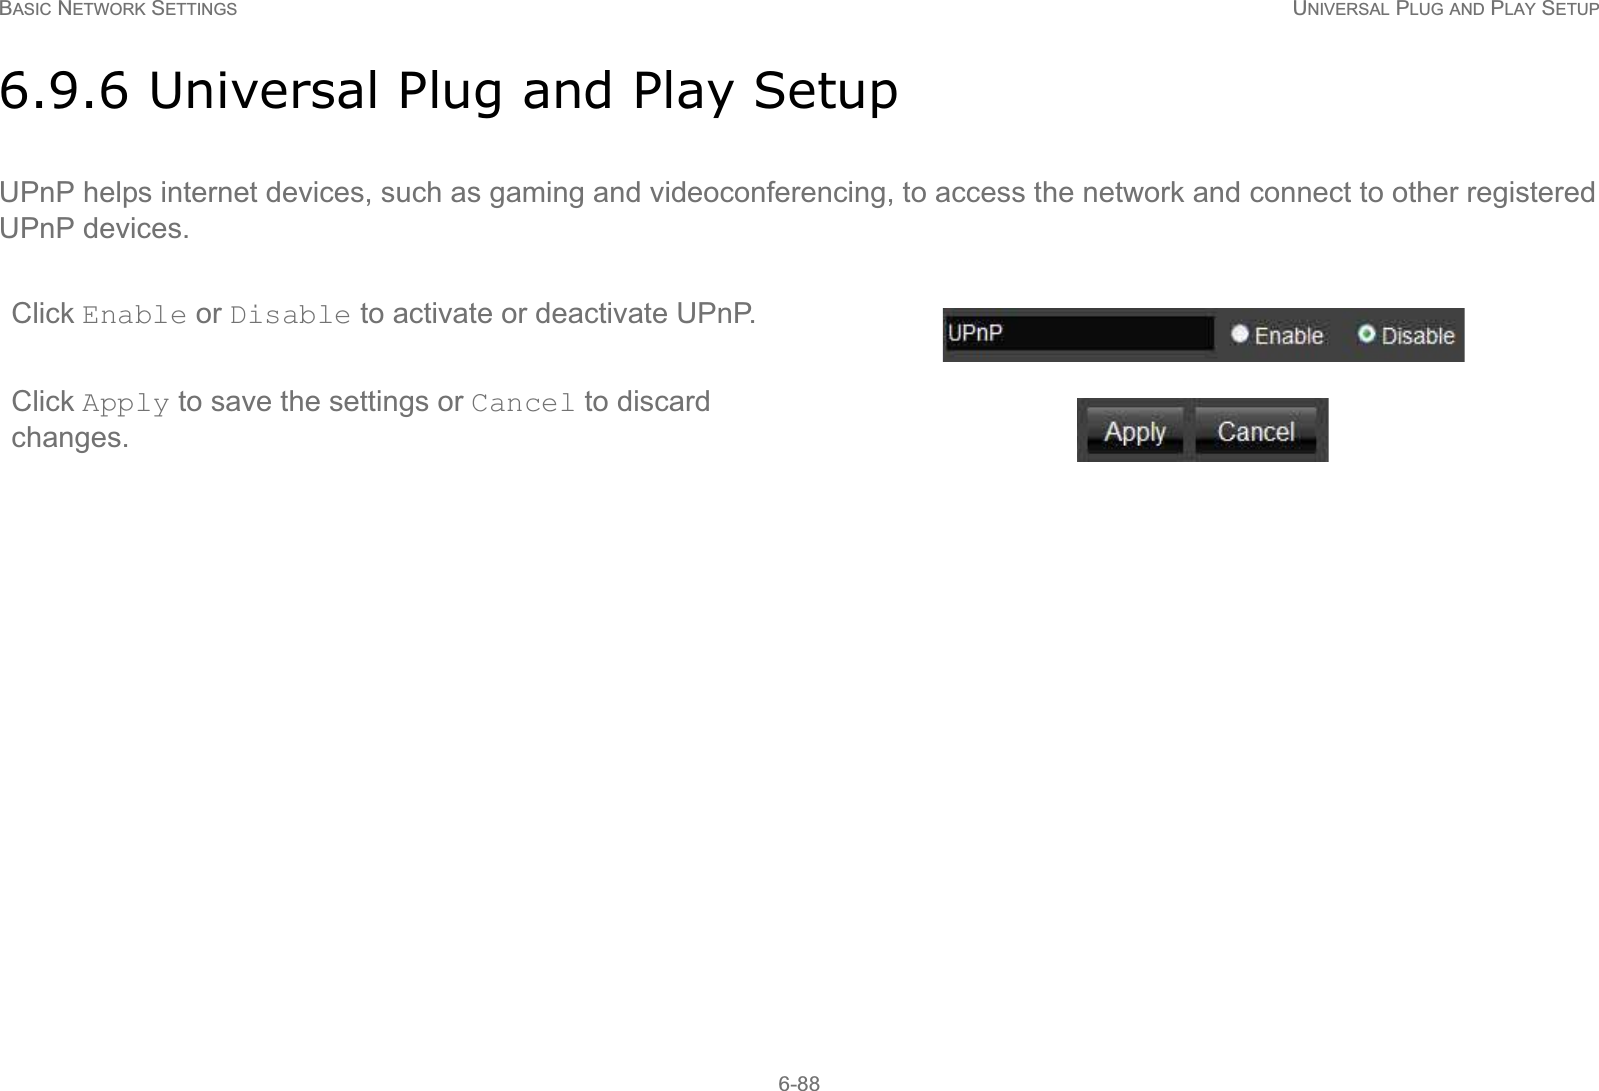 BASIC NETWORK SETTINGS UNIVERSAL PLUG AND PLAY SETUP6-886.9.6 Universal Plug and Play SetupUPnP helps internet devices, such as gaming and videoconferencing, to access the network and connect to other registered UPnP devices.Click Enable or Disable to activate or deactivate UPnP.Click Apply to save the settings or Cancel to discard changes.